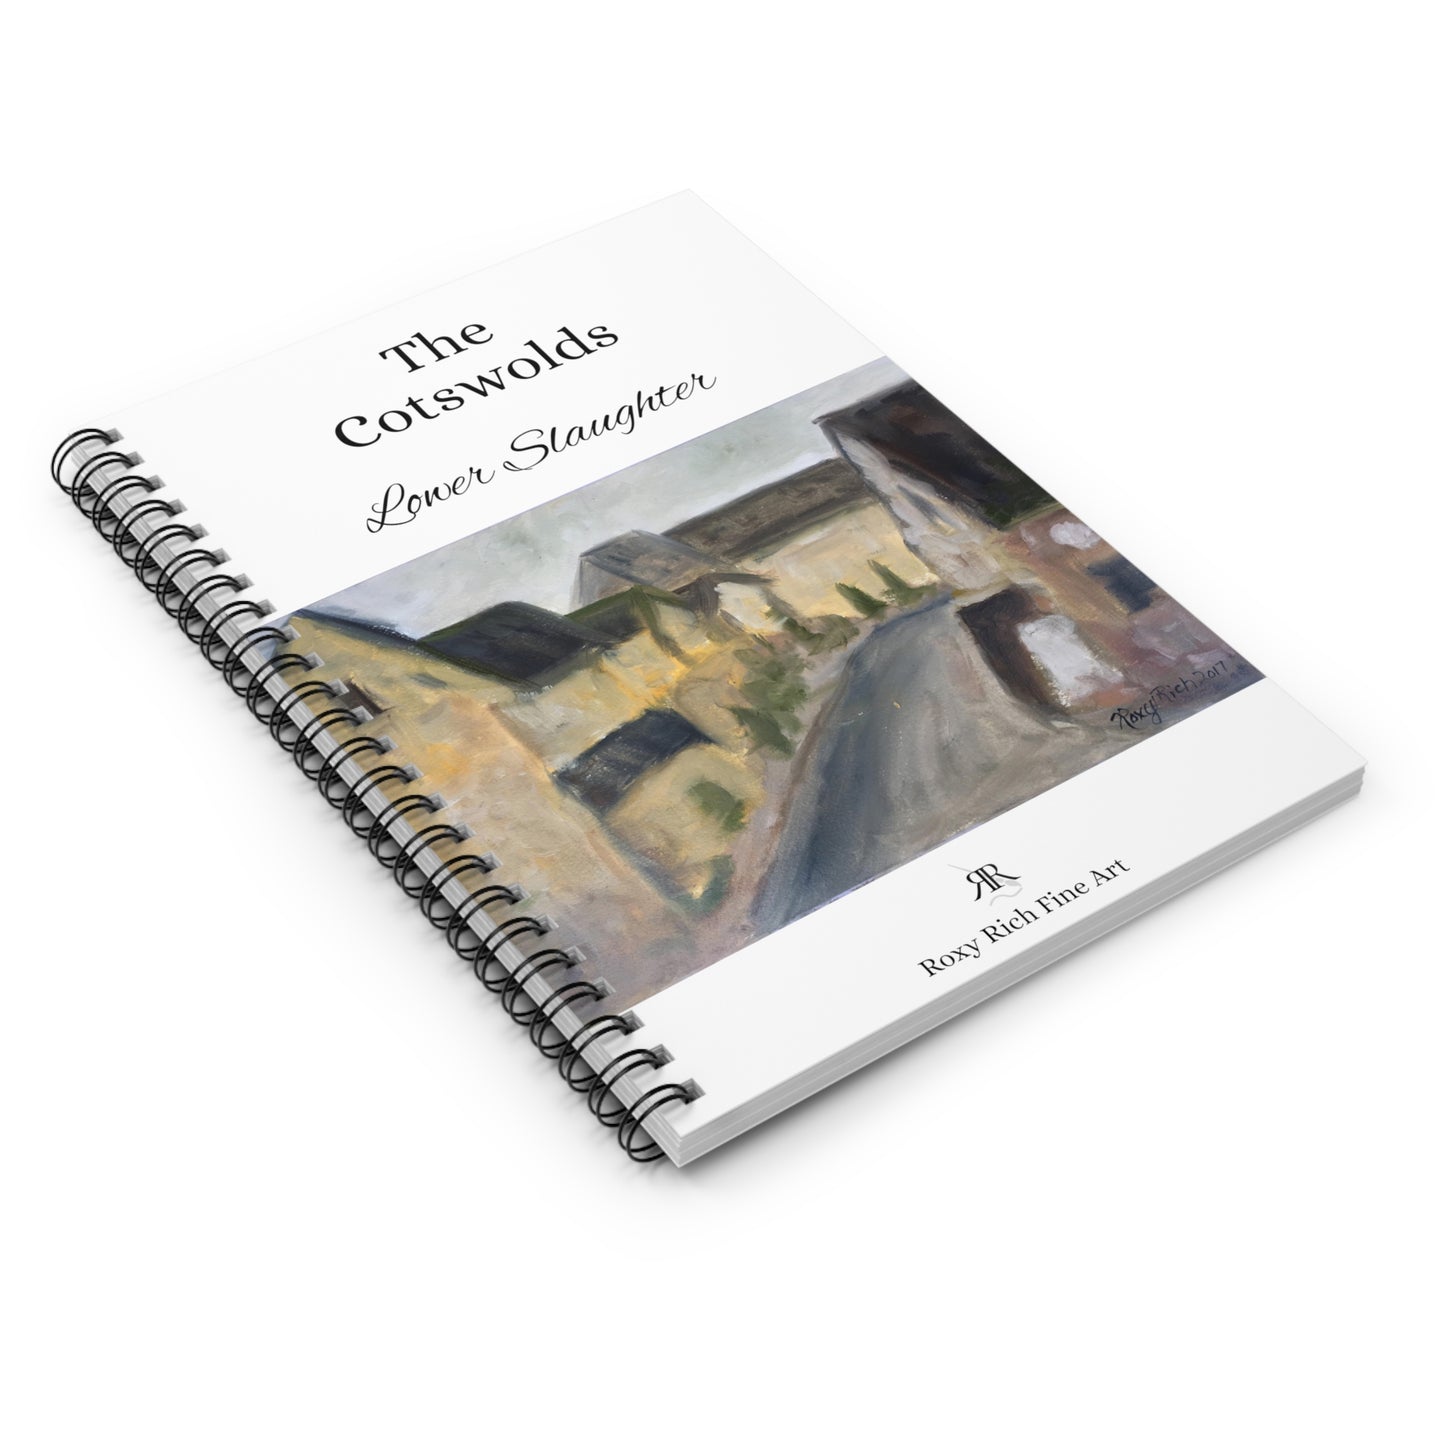 Lower Slaughter "The Cotswolds" Spiral Notebook